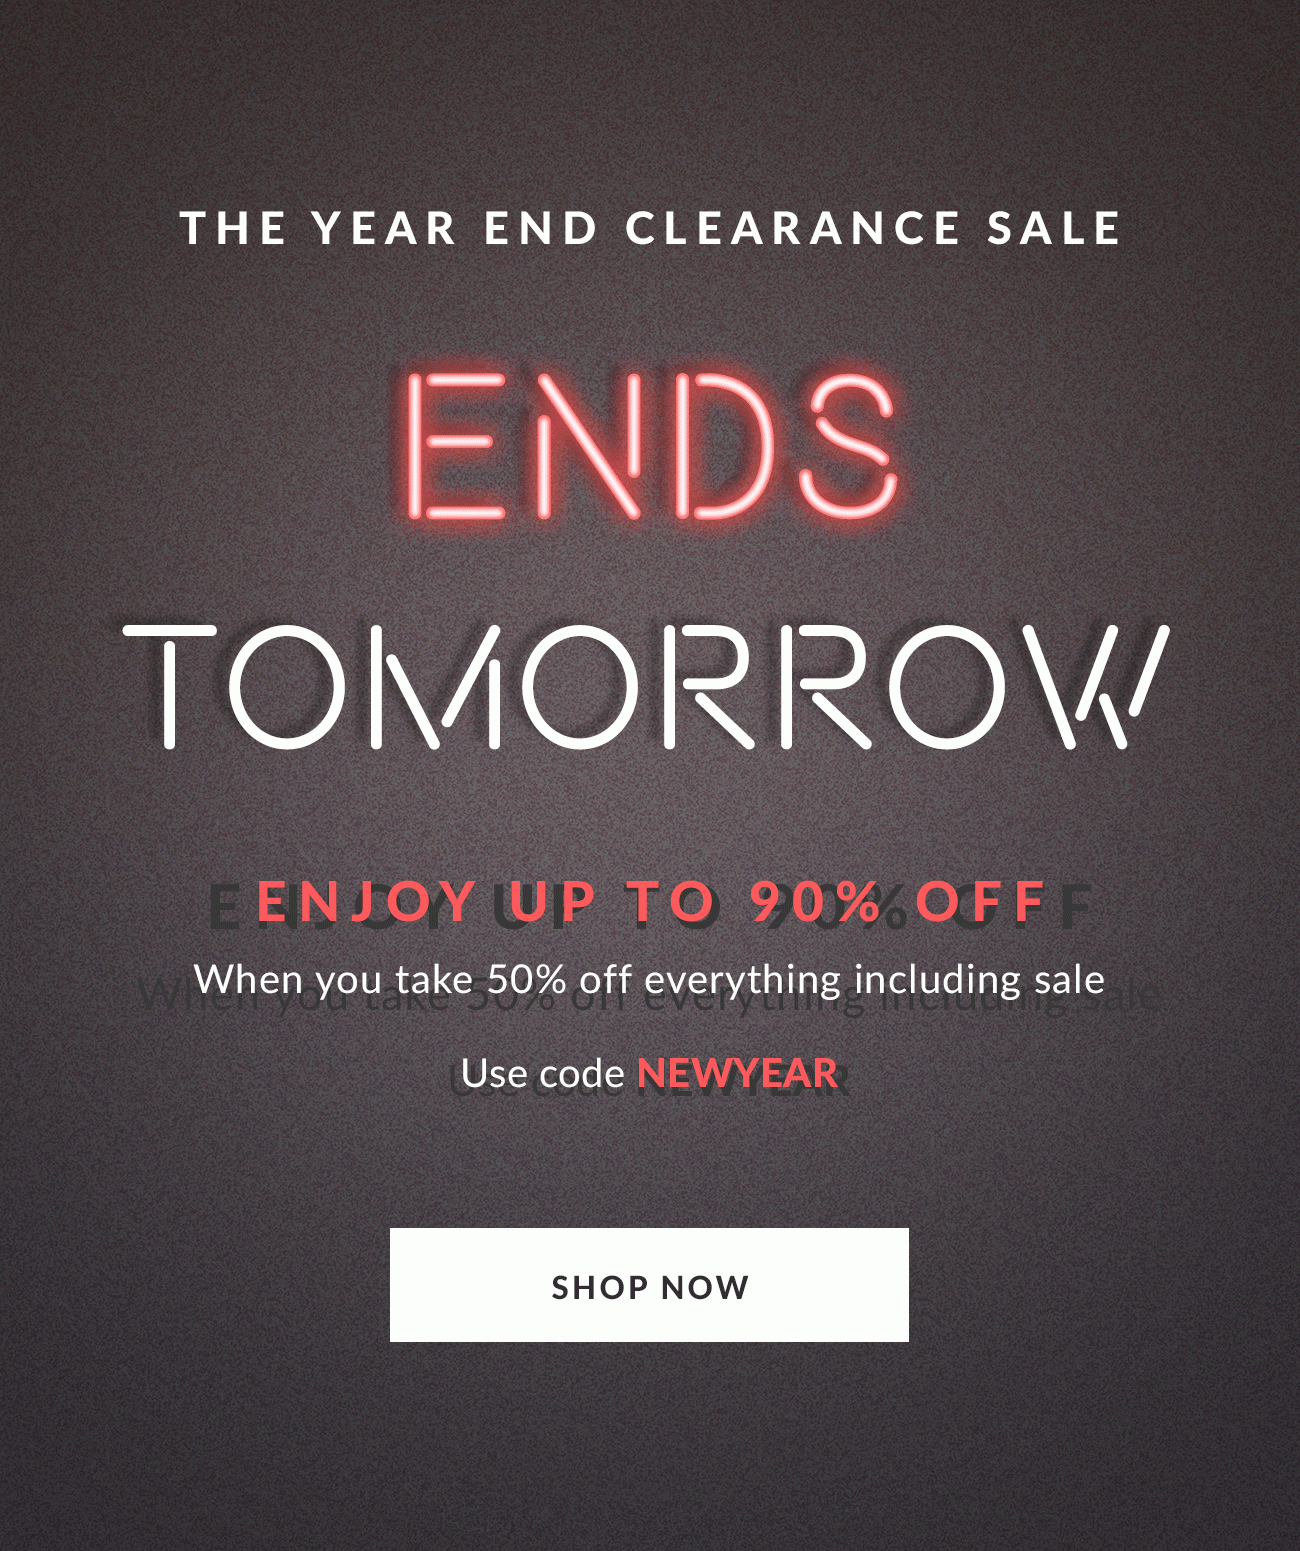 The Year End Clearance Sale Ends Tomorrow - Up to 90% OFF - Code: NEWYEAR - Shop Now